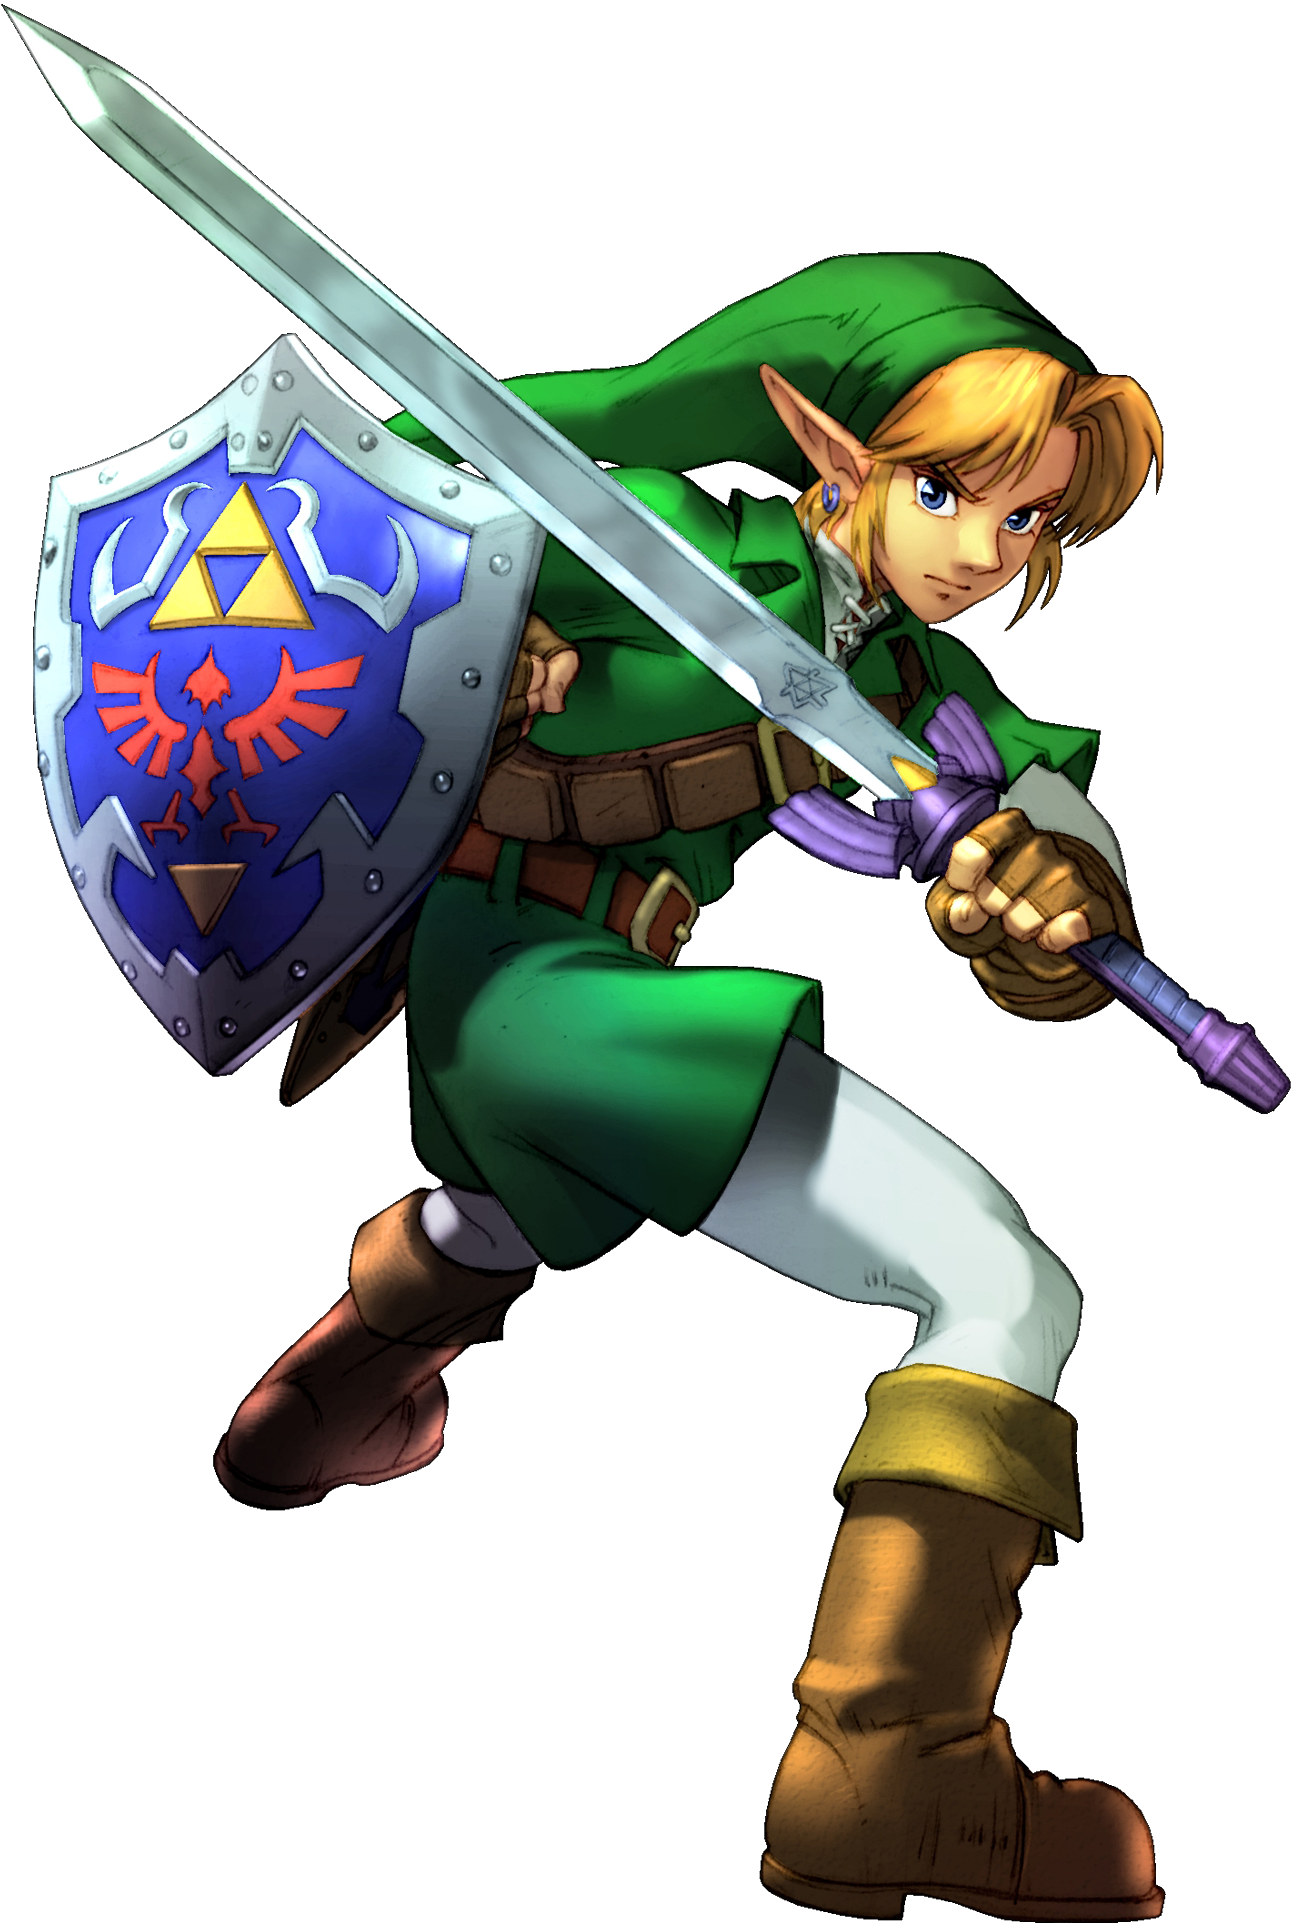 Download Free Of The Link Legend Zelda ICON favicon